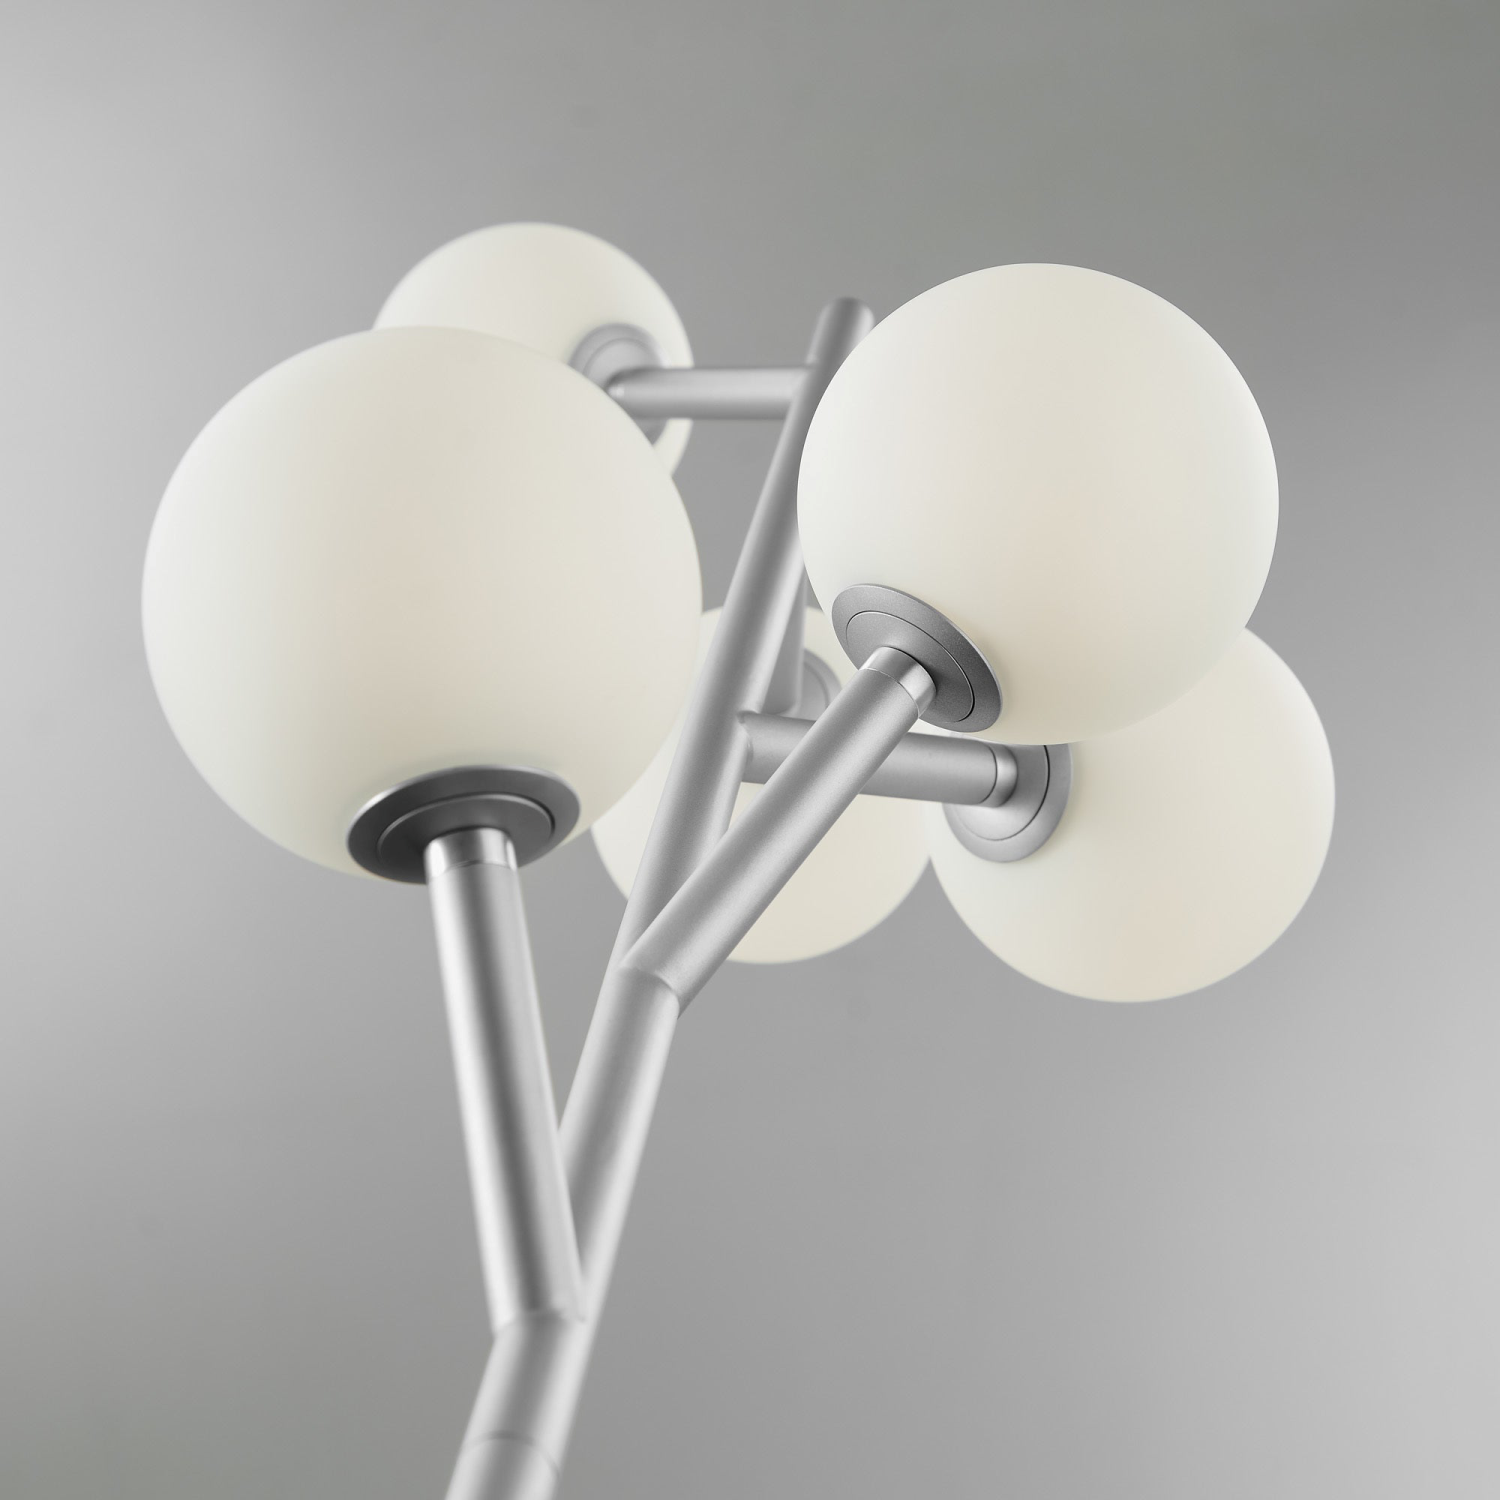 Blanca Floor Lamp Close Up of Lights and Finish Details